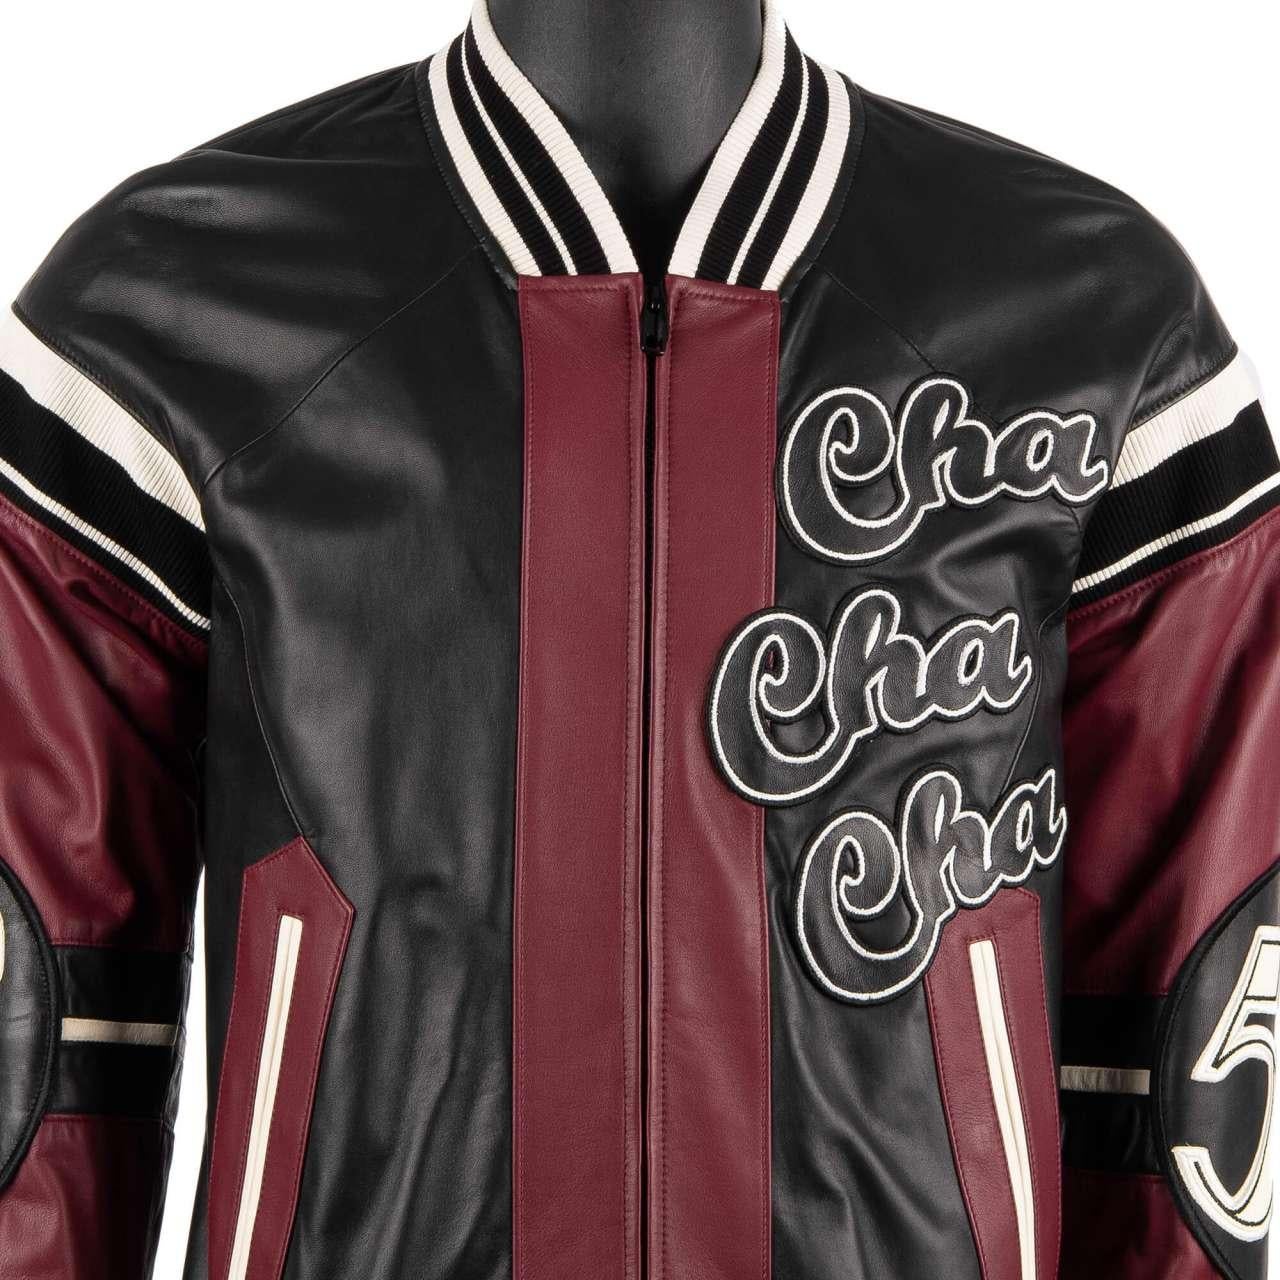 D&G Club Lounge Cello Embroidered Bomber Leather Jacket Black Bordeaux 46 For Sale 1